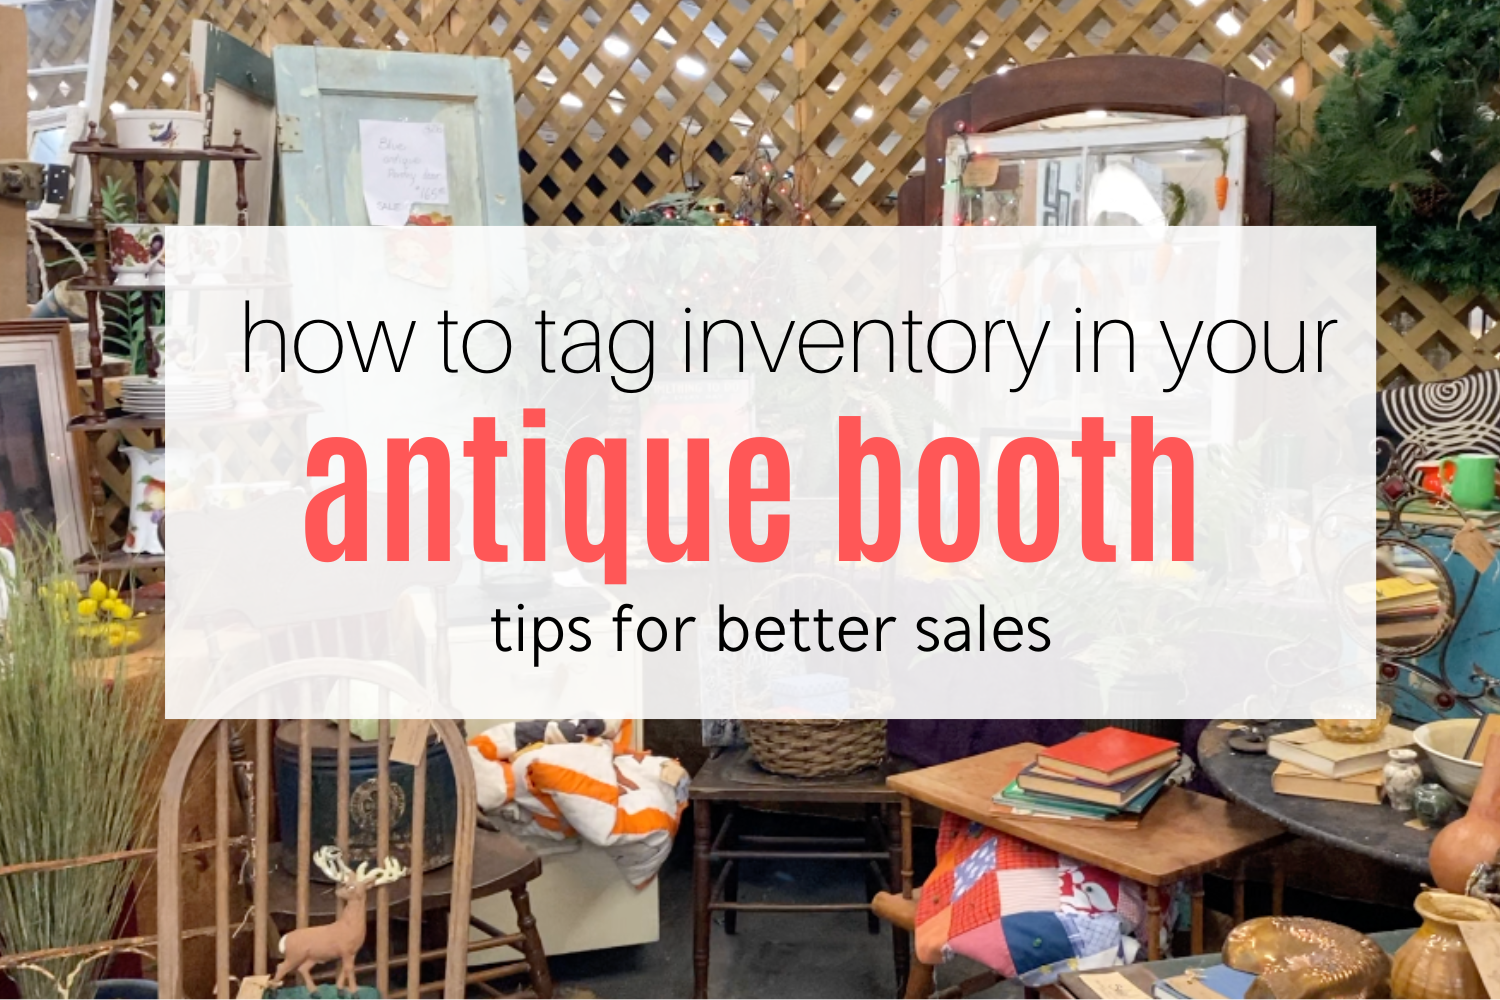 How to Tags Items in Your Antique Booth